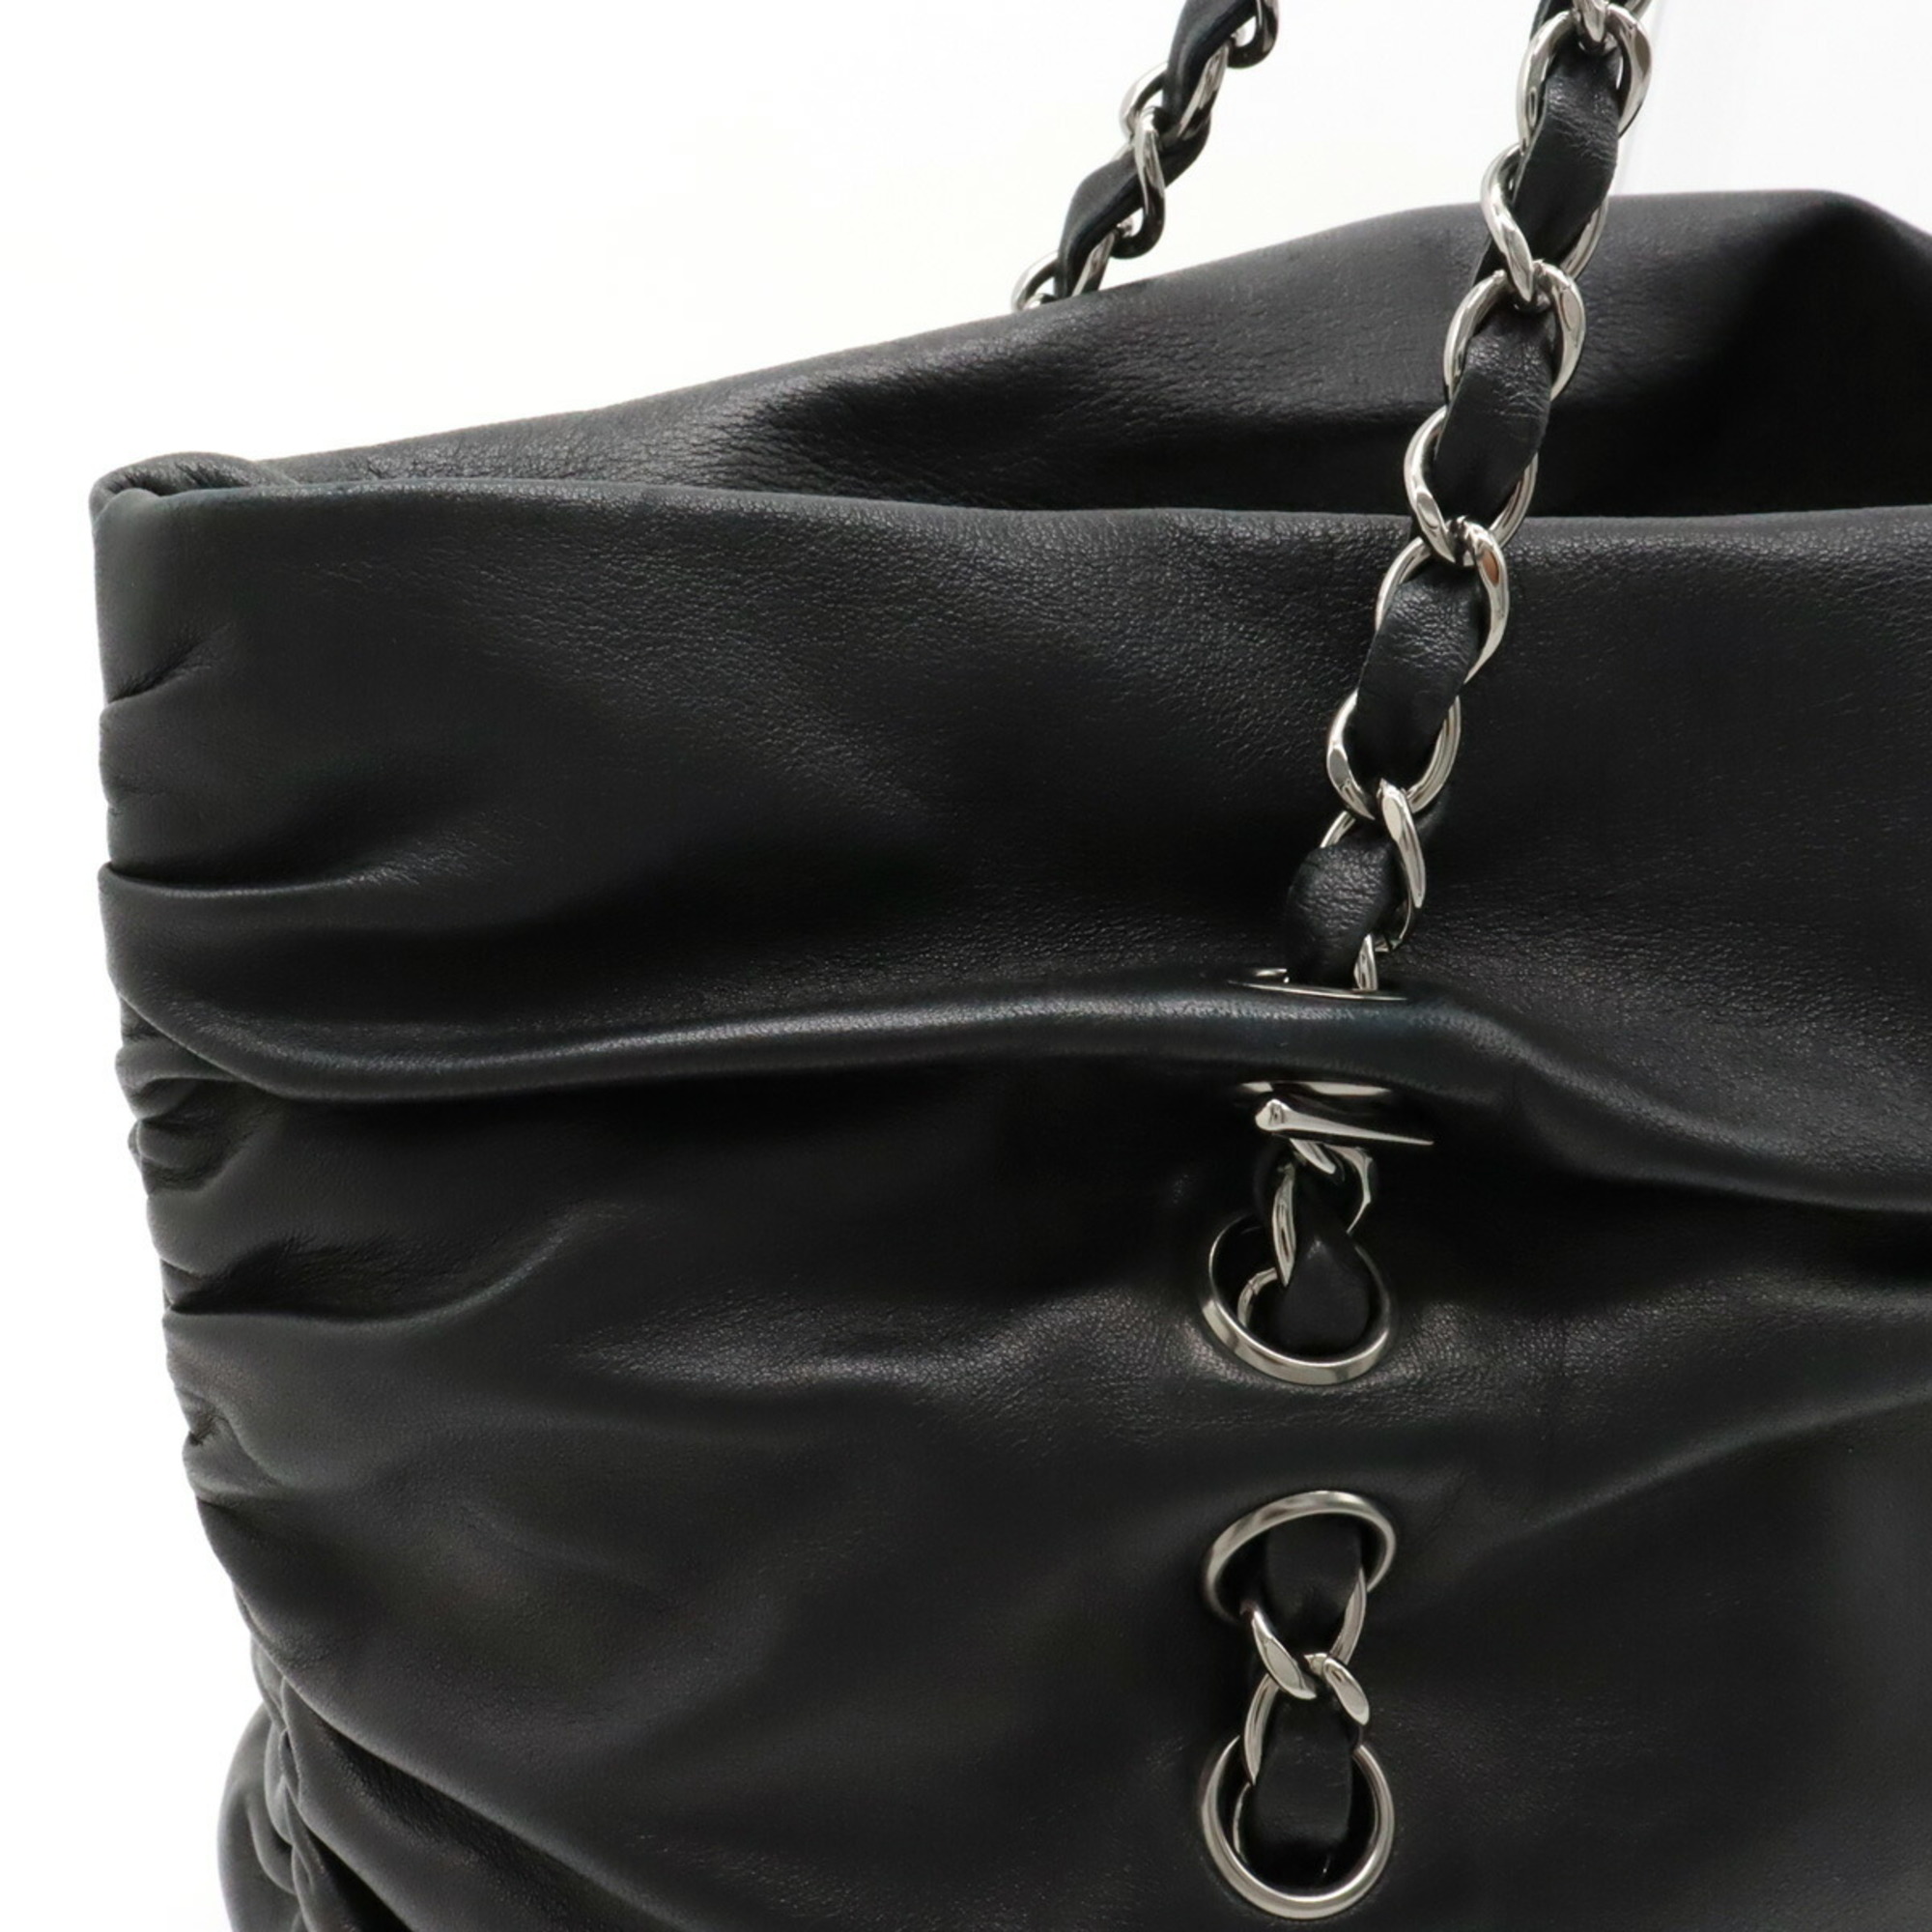 CHANEL COCO MARK GATHERED CHAIN TOTE BAG SHOULDER LEATHER BLACK